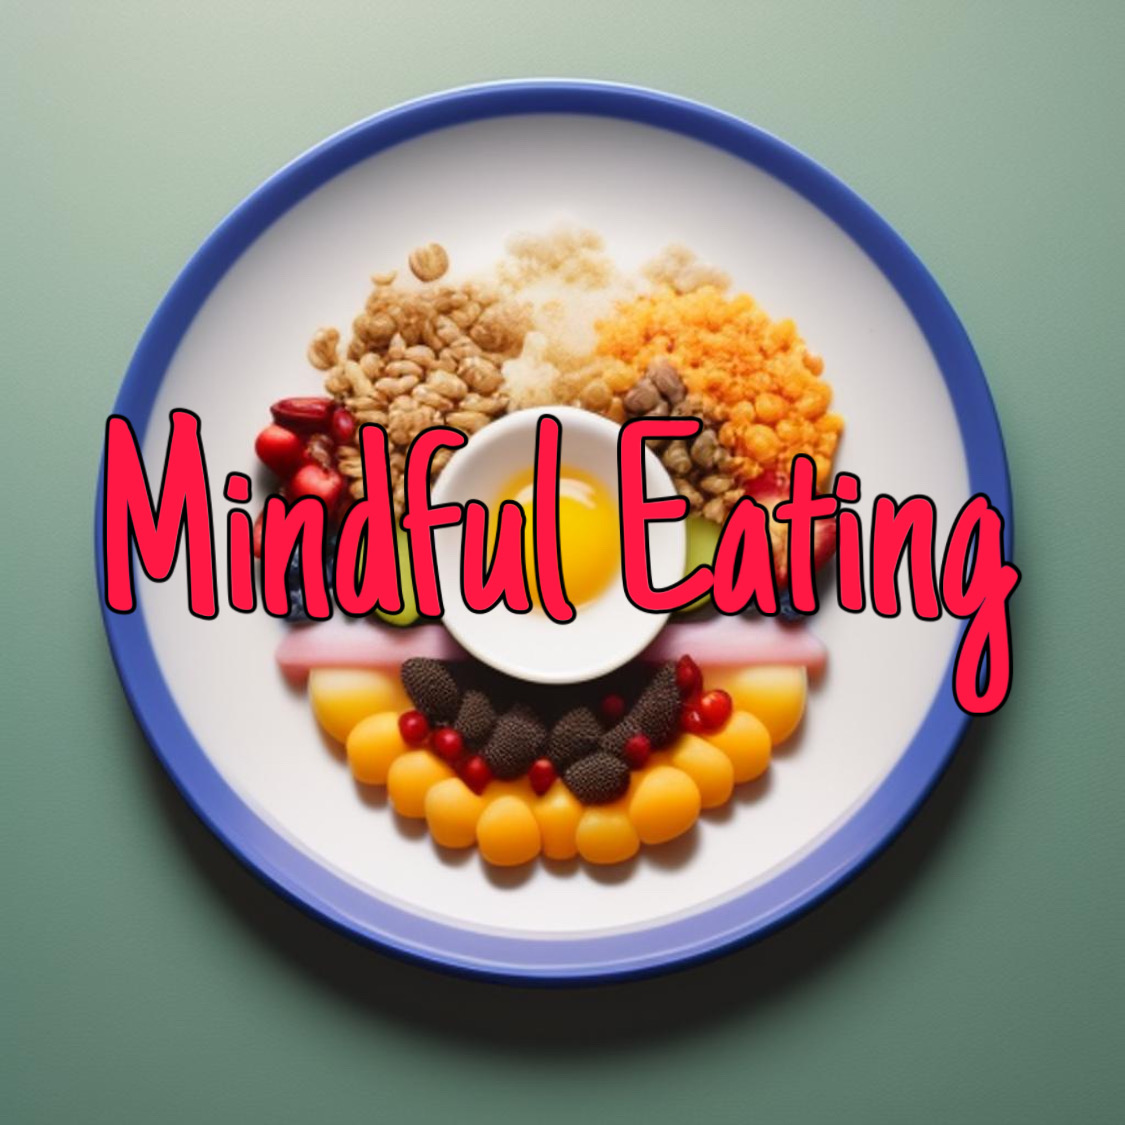 Say Hello to Mindful Eating